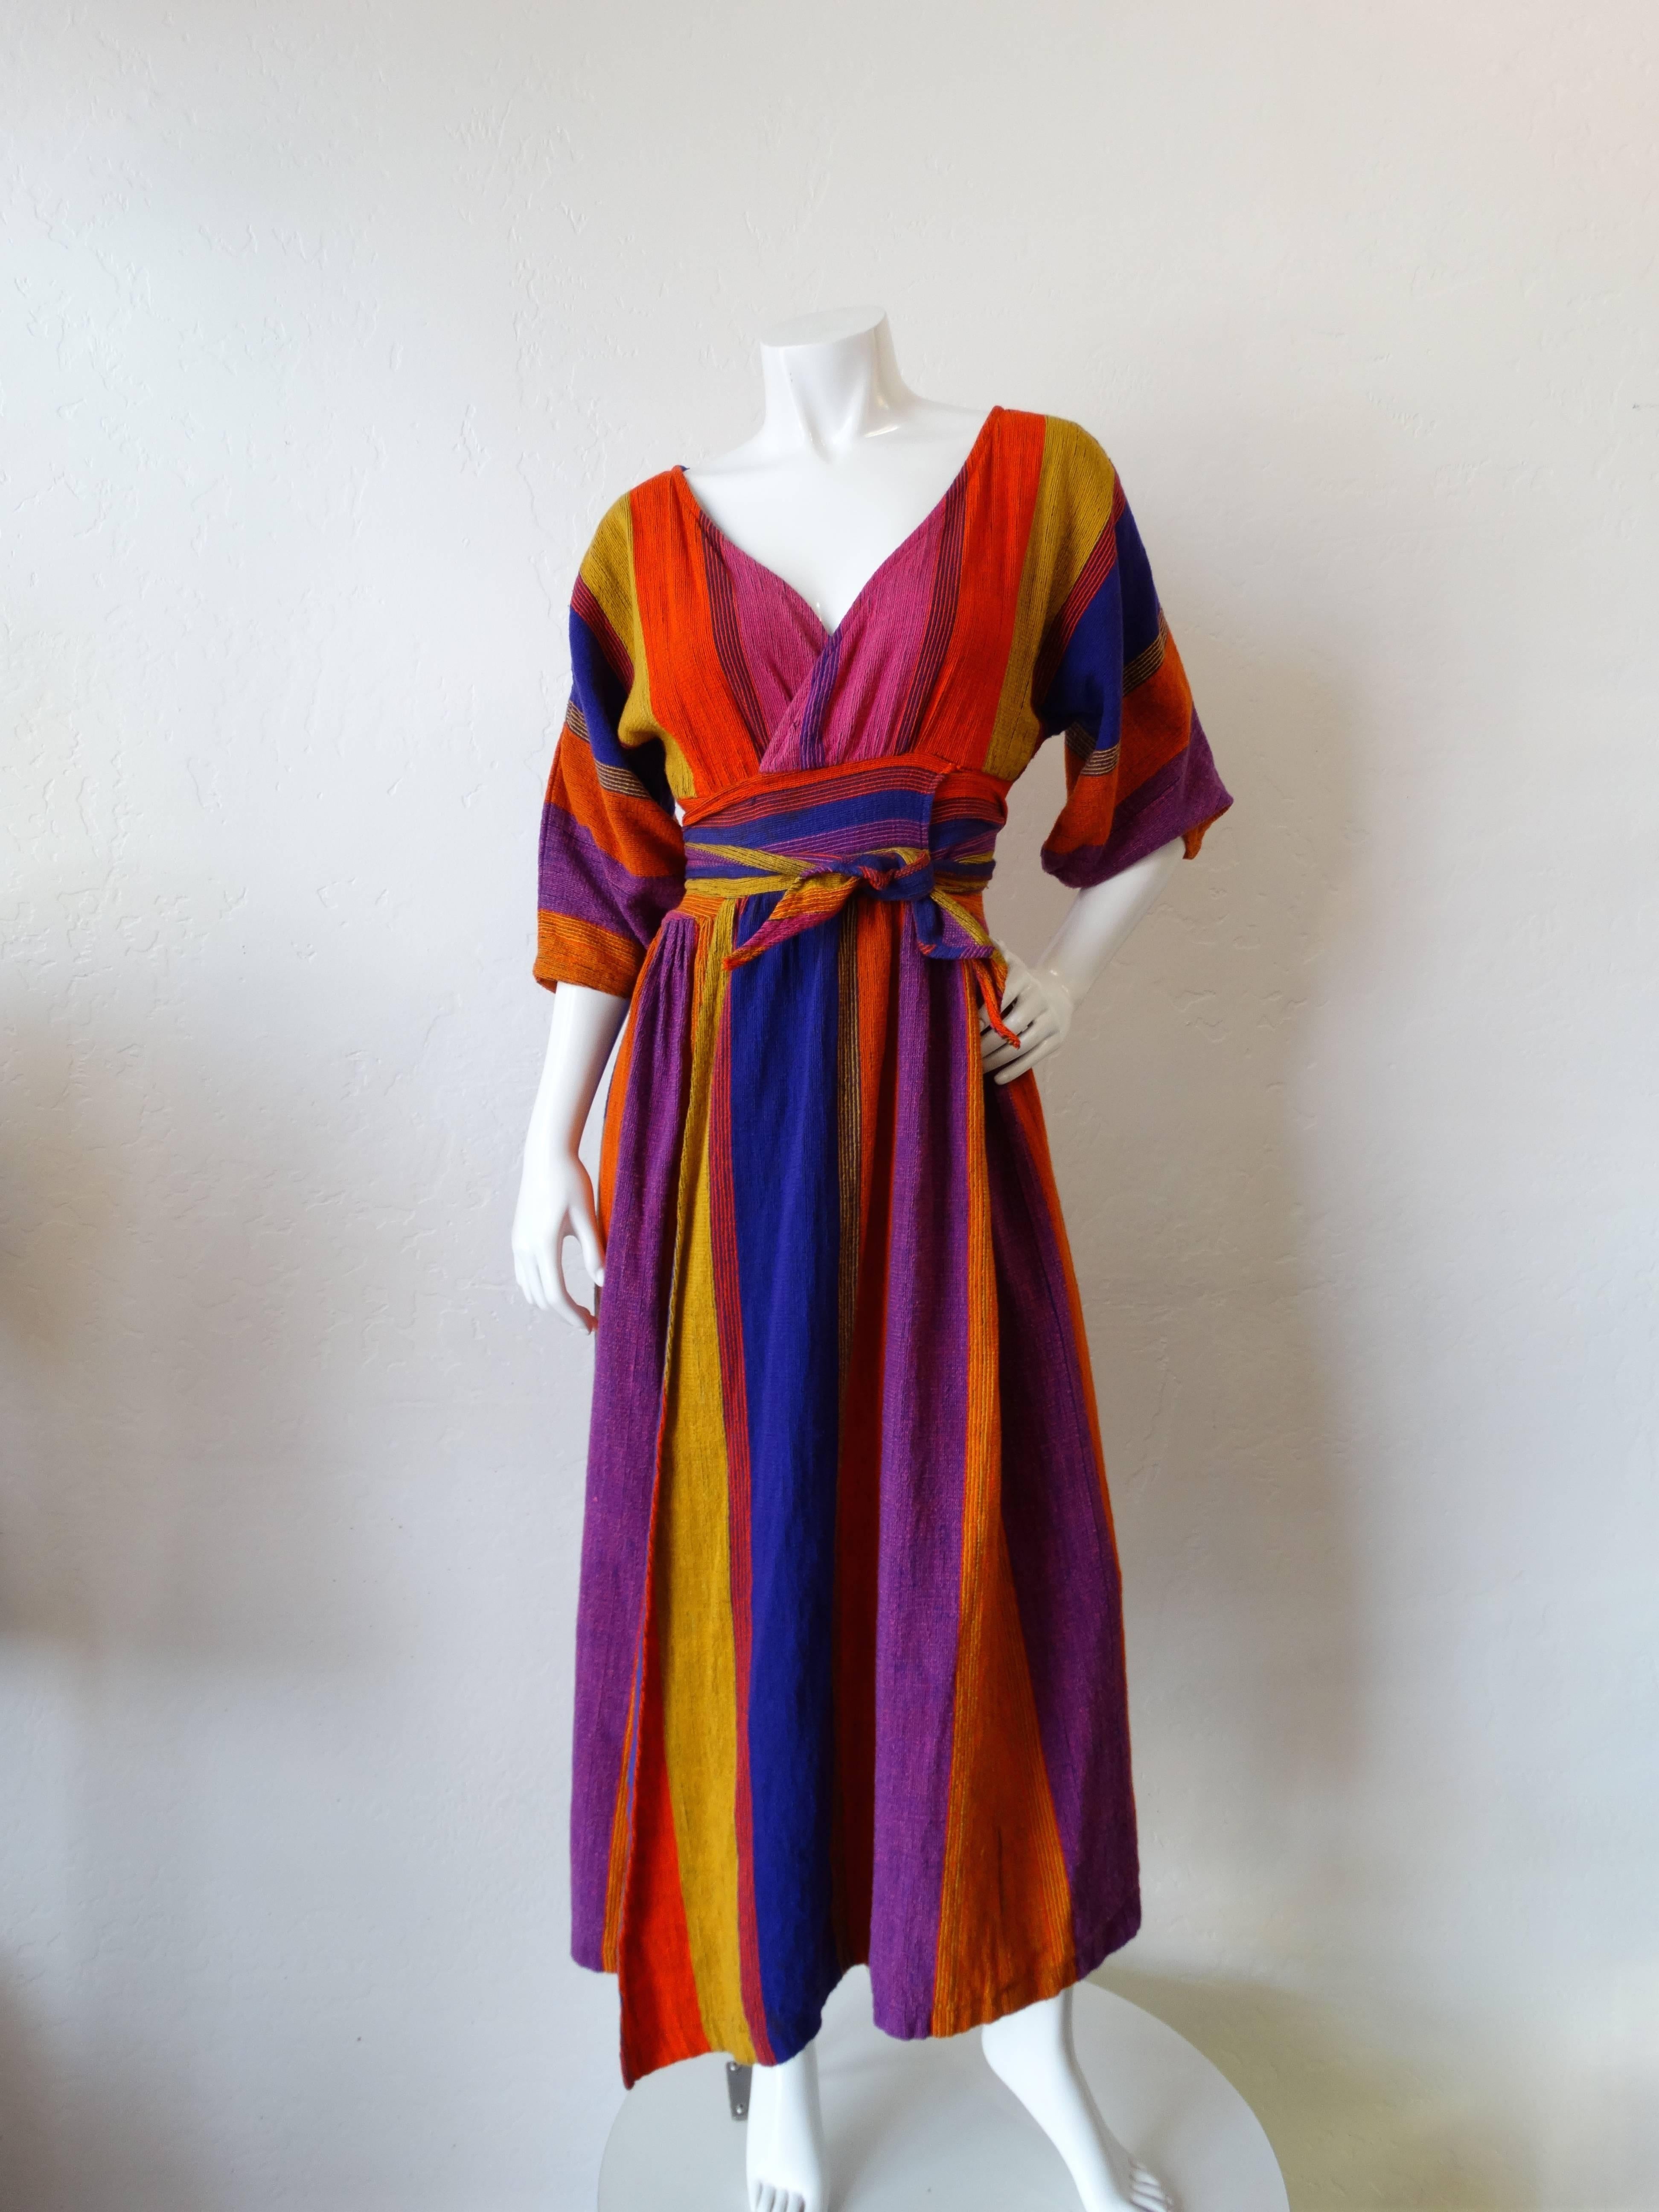 Incredible 1970s Rikma dress imported straight from Israel! Striped, woven cotton fabric in brilliant hues of violet, orange, pink and yellow! Short, bell-like sleeves with slits at the tops of the shoulders. Wrap dress silhouette, ties around the